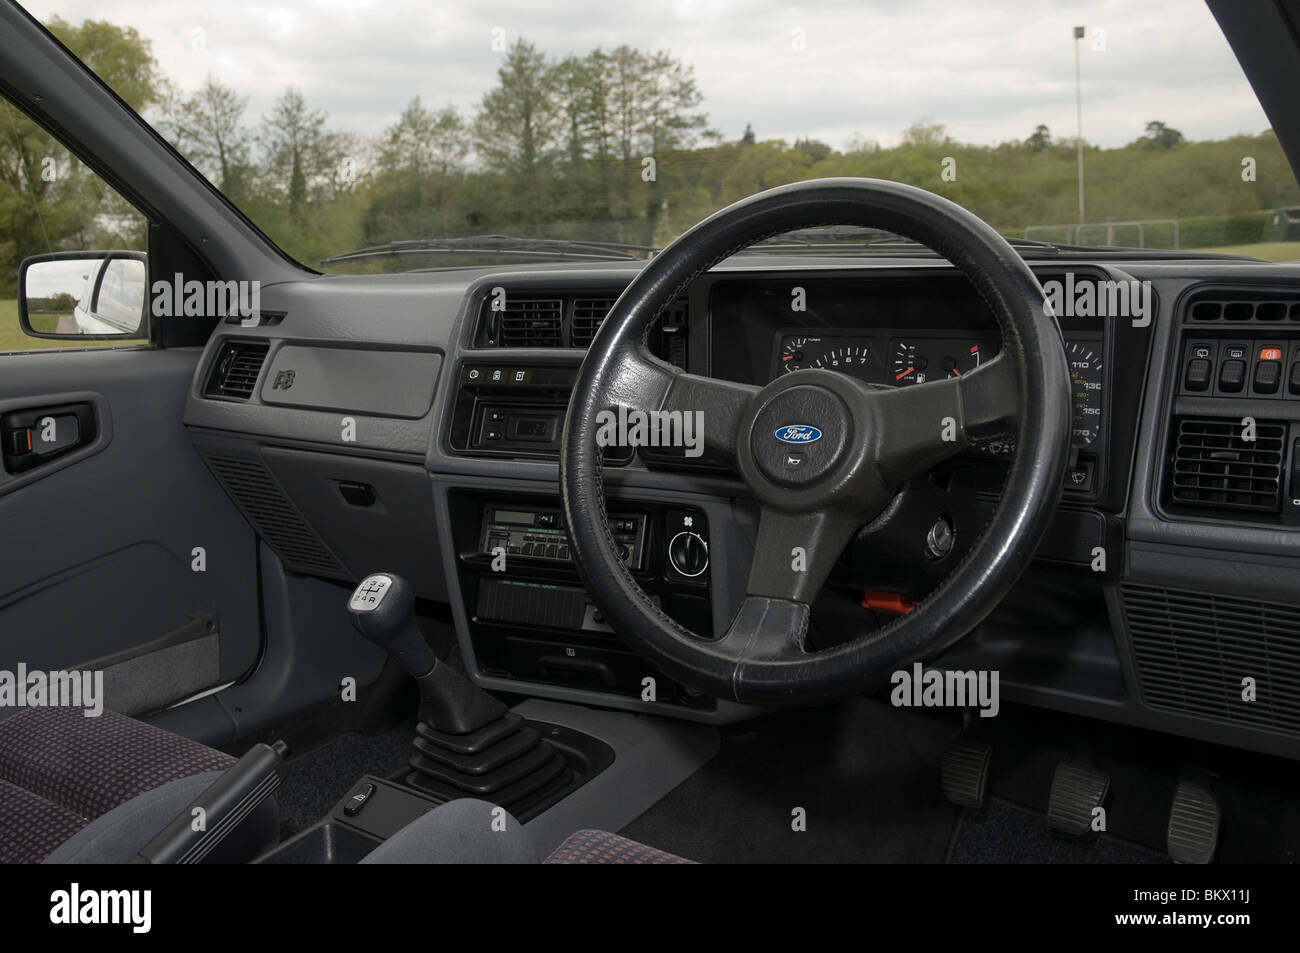 1986 Ford Sierra RS Cosworth dashboard Stock Photo